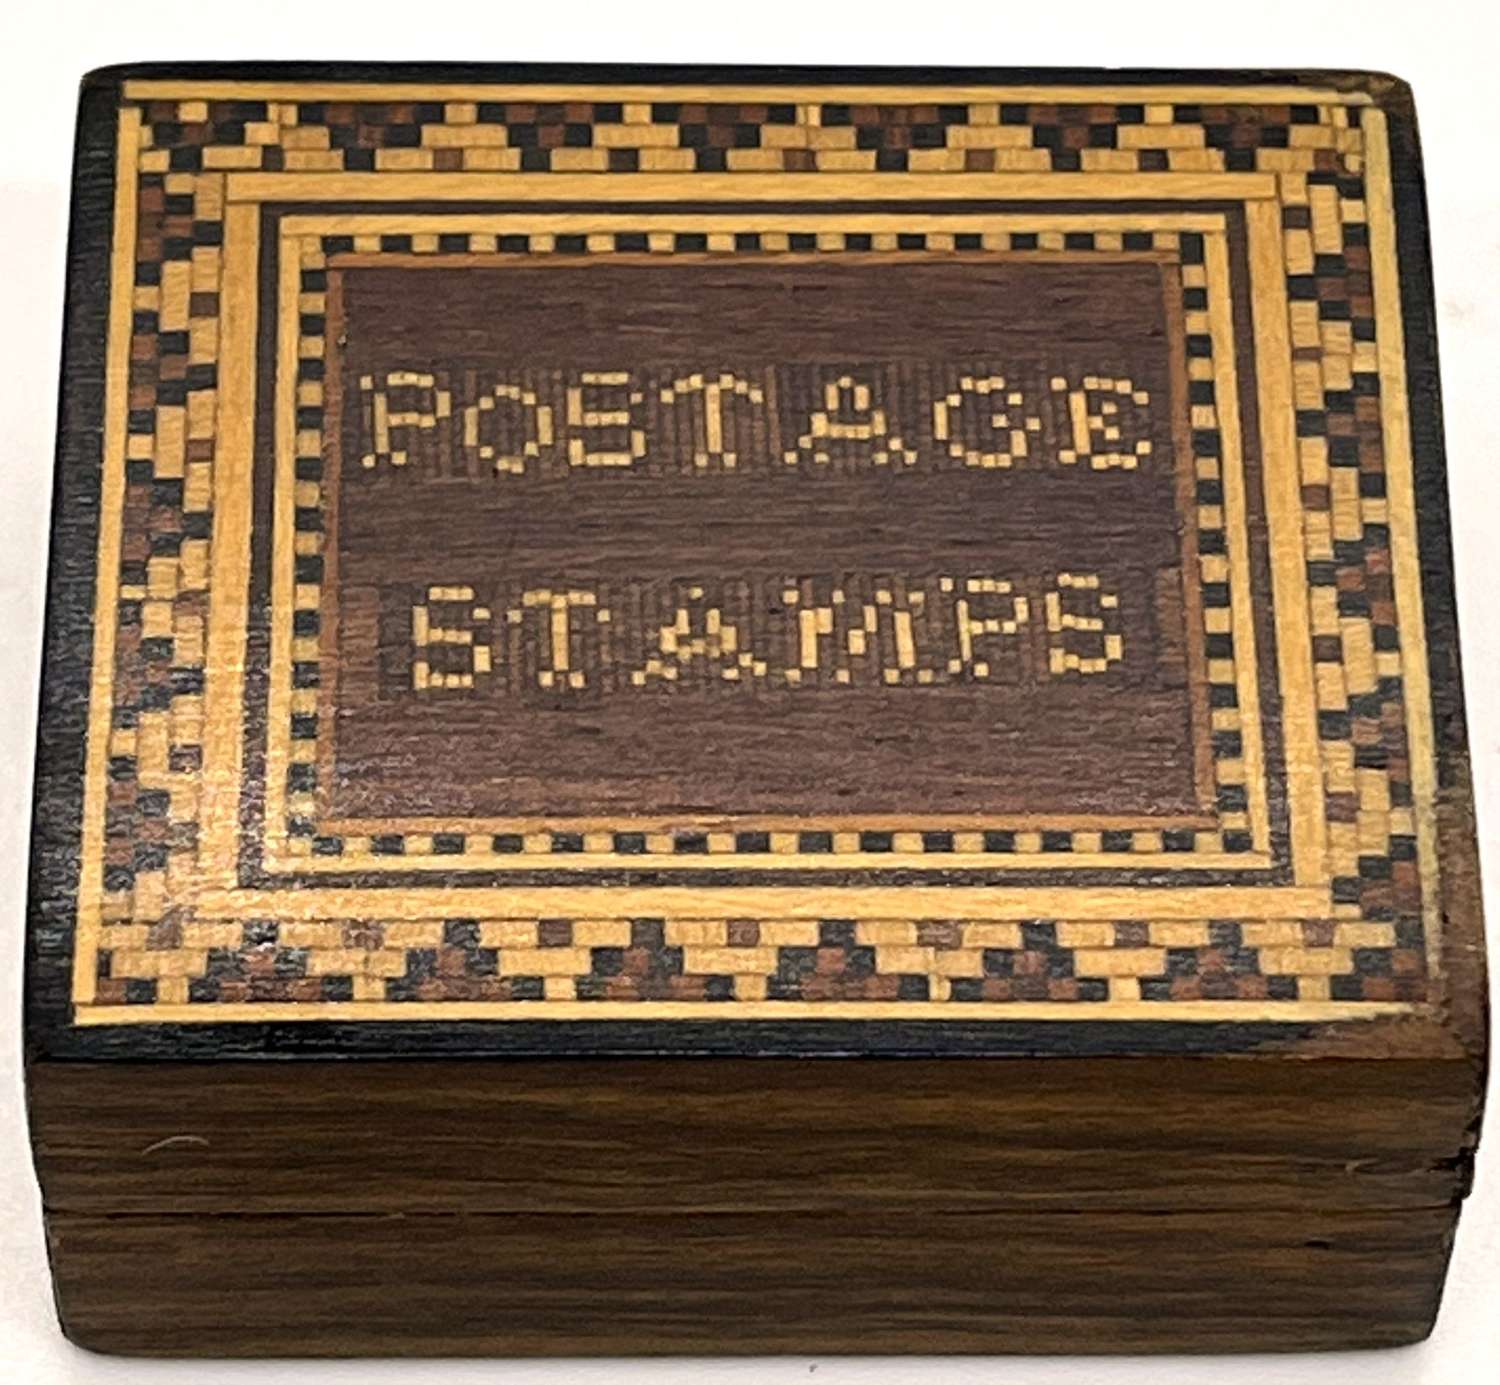 Tunbridge Ware Inlaid Marquetry Postage Stamps Box